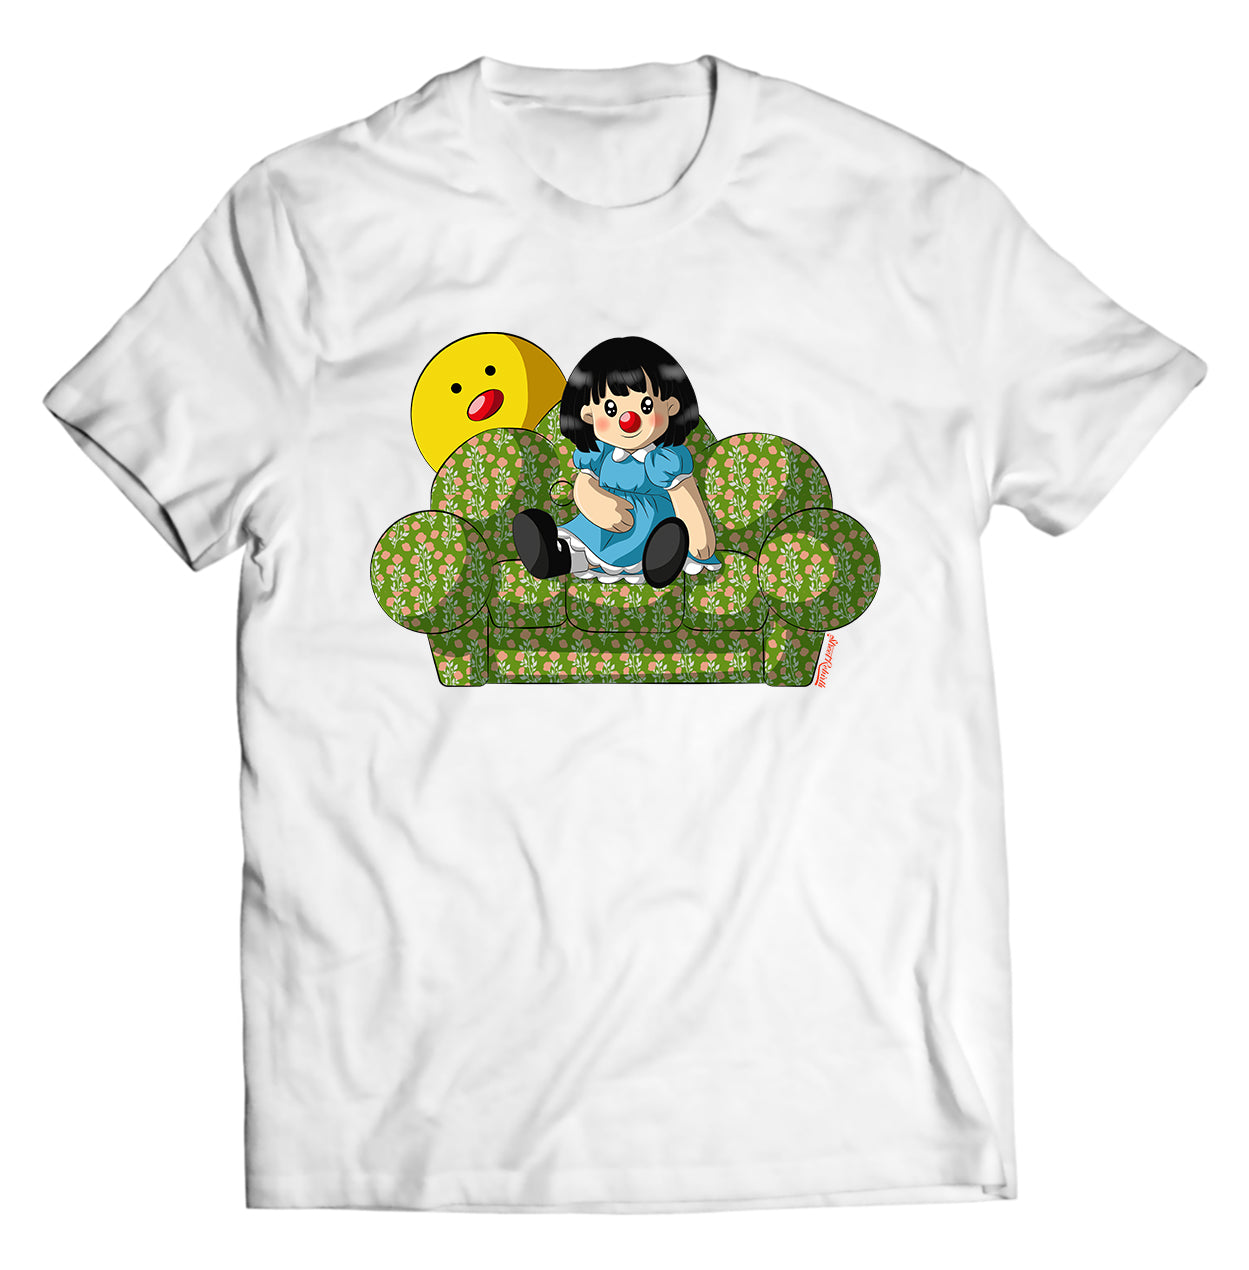 Molly Big Comfy Couch Shirt - Direct To Garment Quality Print - Unisex Shirt - Gift For Him or Her